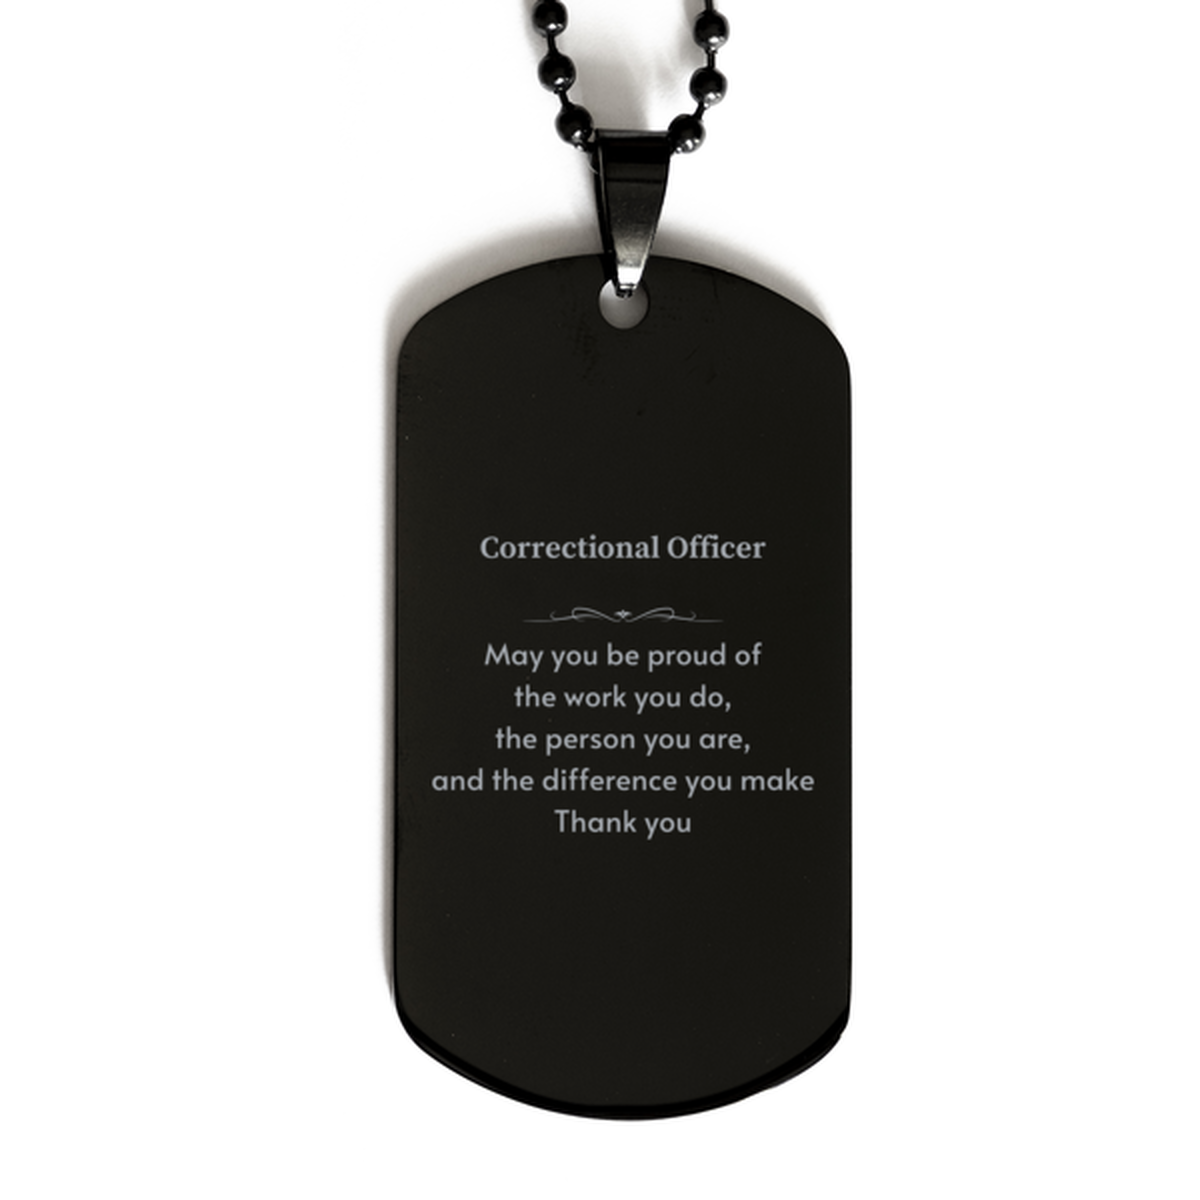 Heartwarming Black Dog Tag Retirement Coworkers Gifts for Correctional Officer, Correctional Officer May You be proud of the work you do, the person you are Gifts for Boss Men Women Friends